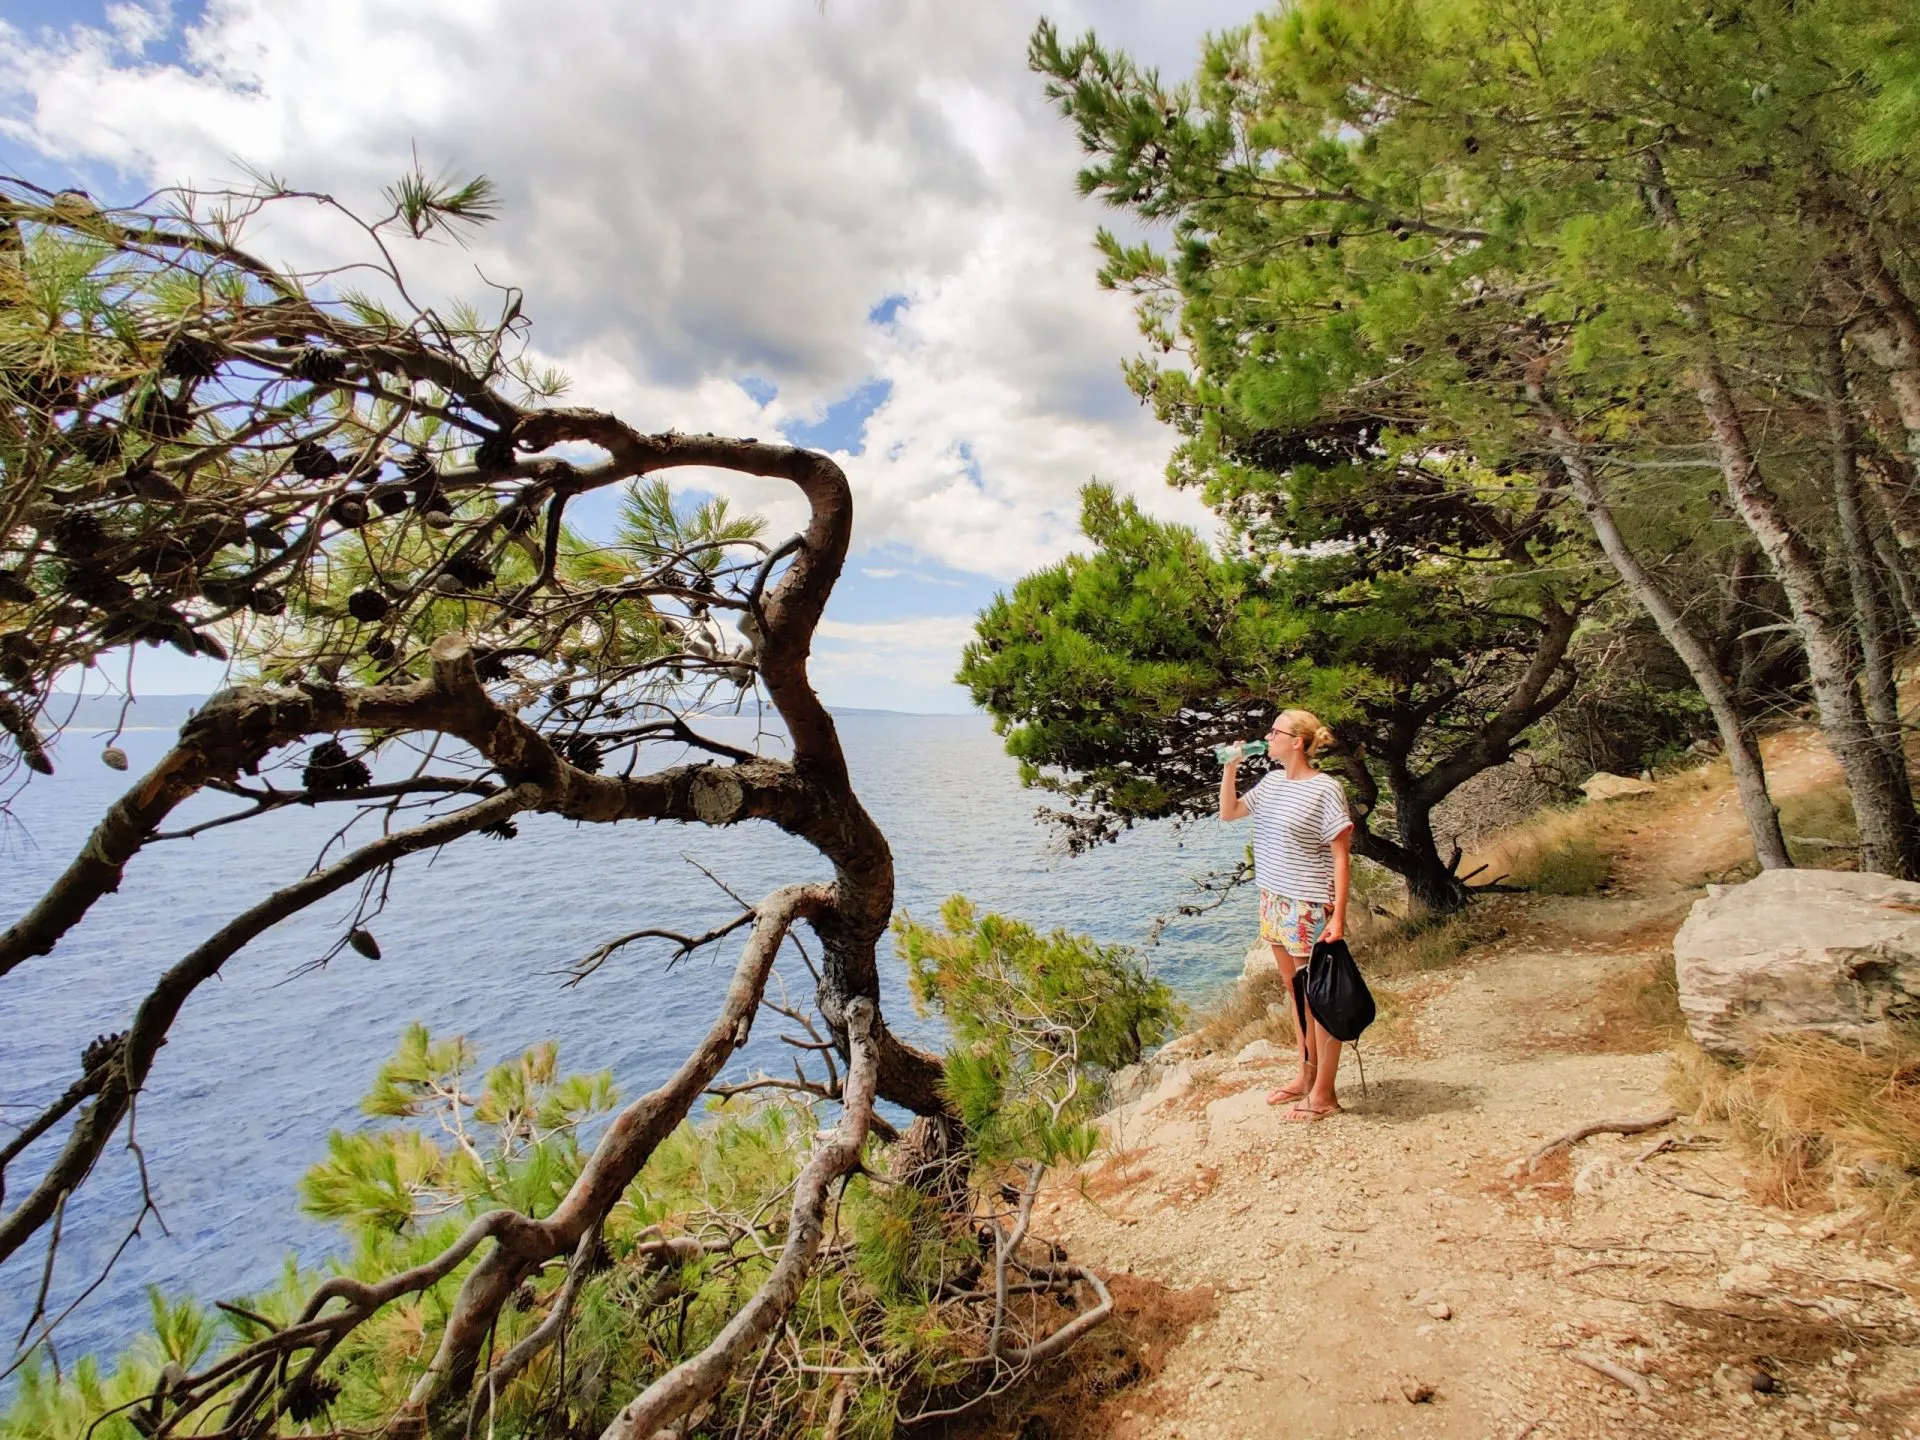 Young active feamle tourist taking a break, drinking water, wearing small backpack while walking on coastal path among pine trees looking for remote cove to swim alone in peace on seaside in Croatia.